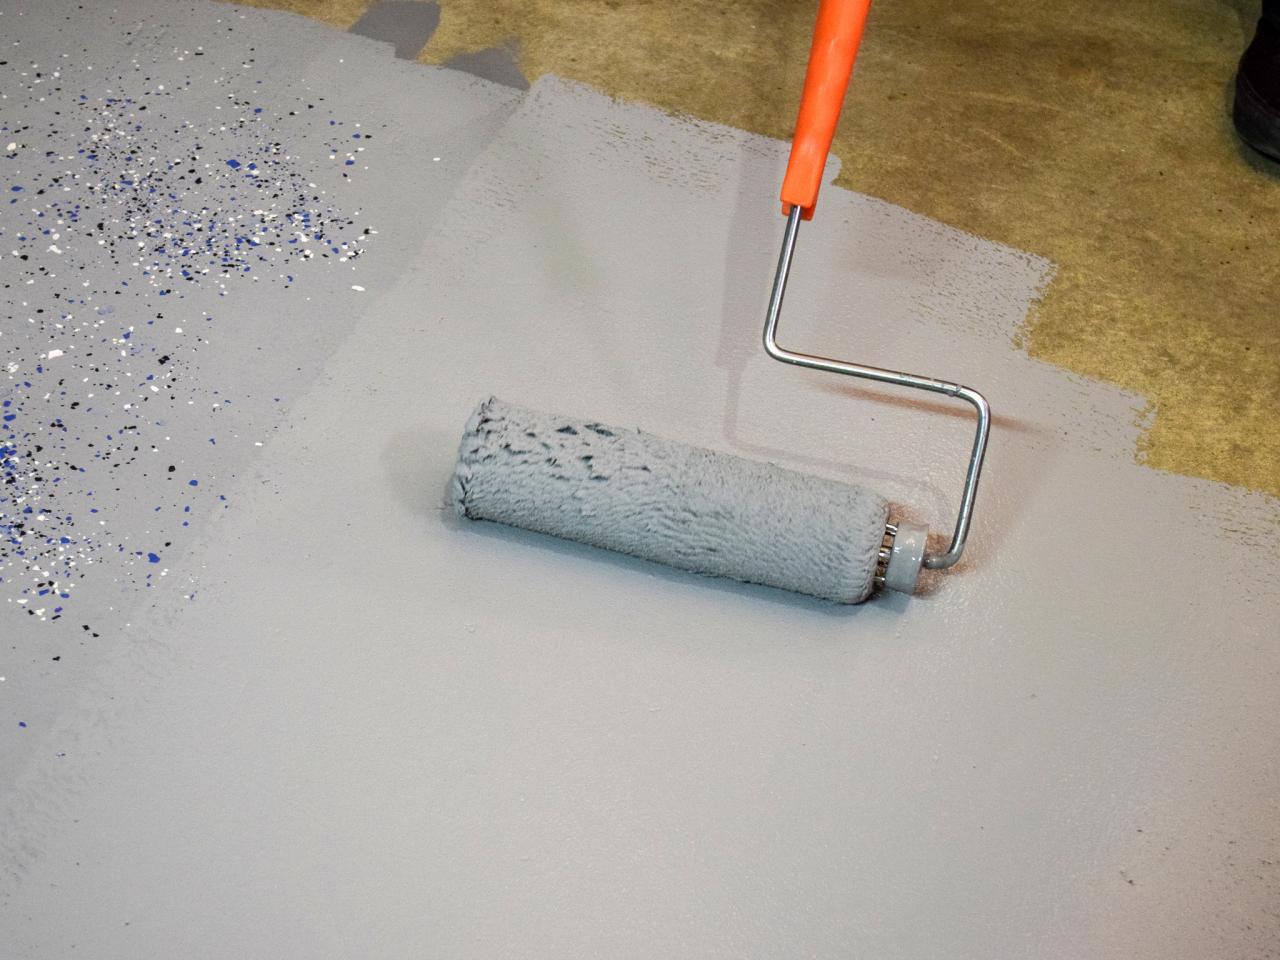  DIY Garage Floor Coating - What You Need To Know